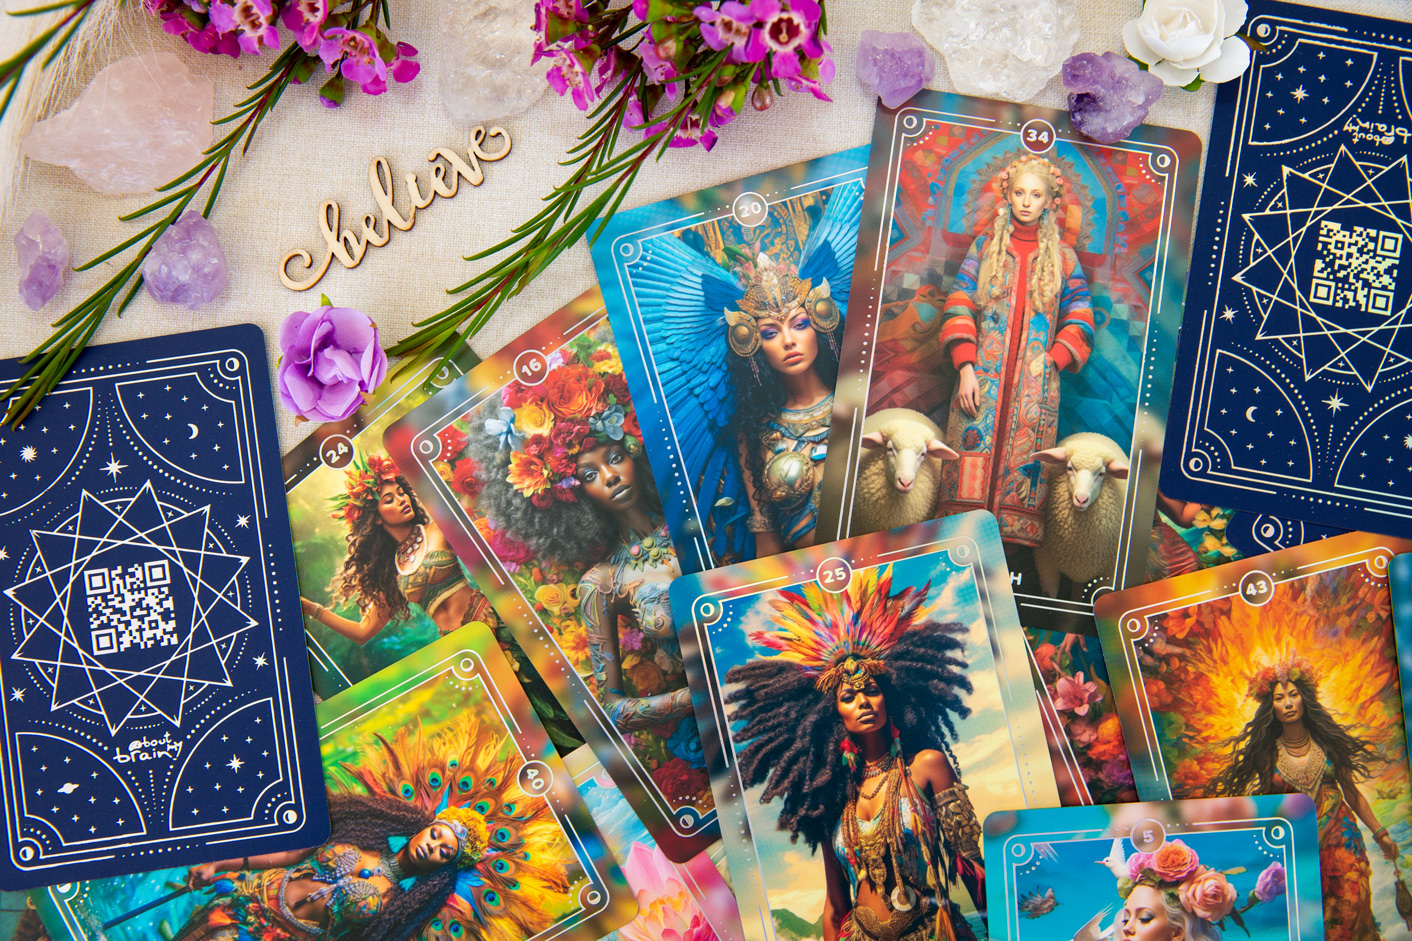 About my Brain Oracle Card Deck: Goddesses of the World - Believe Spread